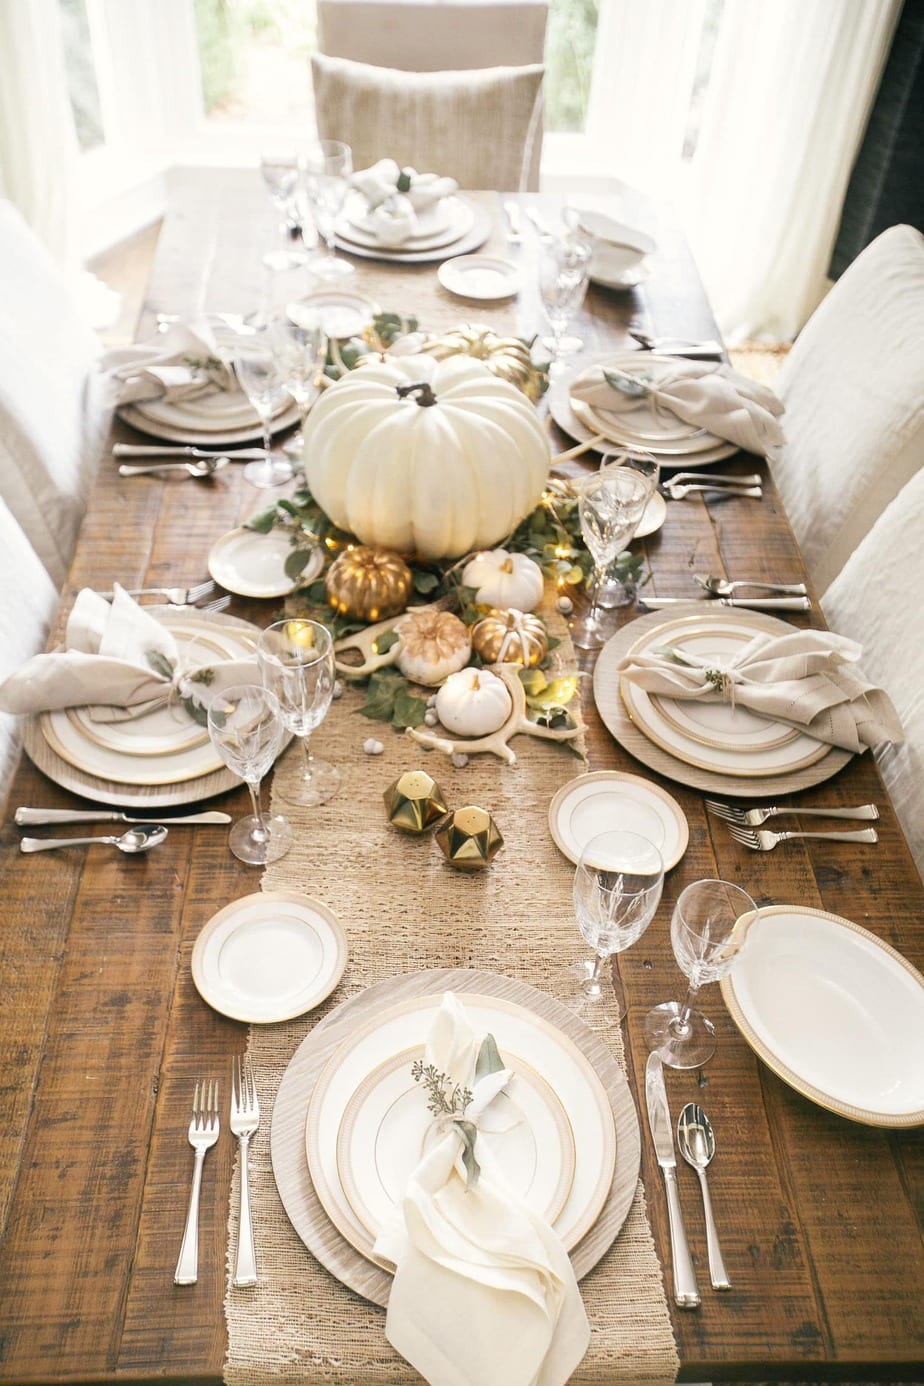 15 Simple & Elegant Fall Tablescapes | Neutral Fall Table Decorations